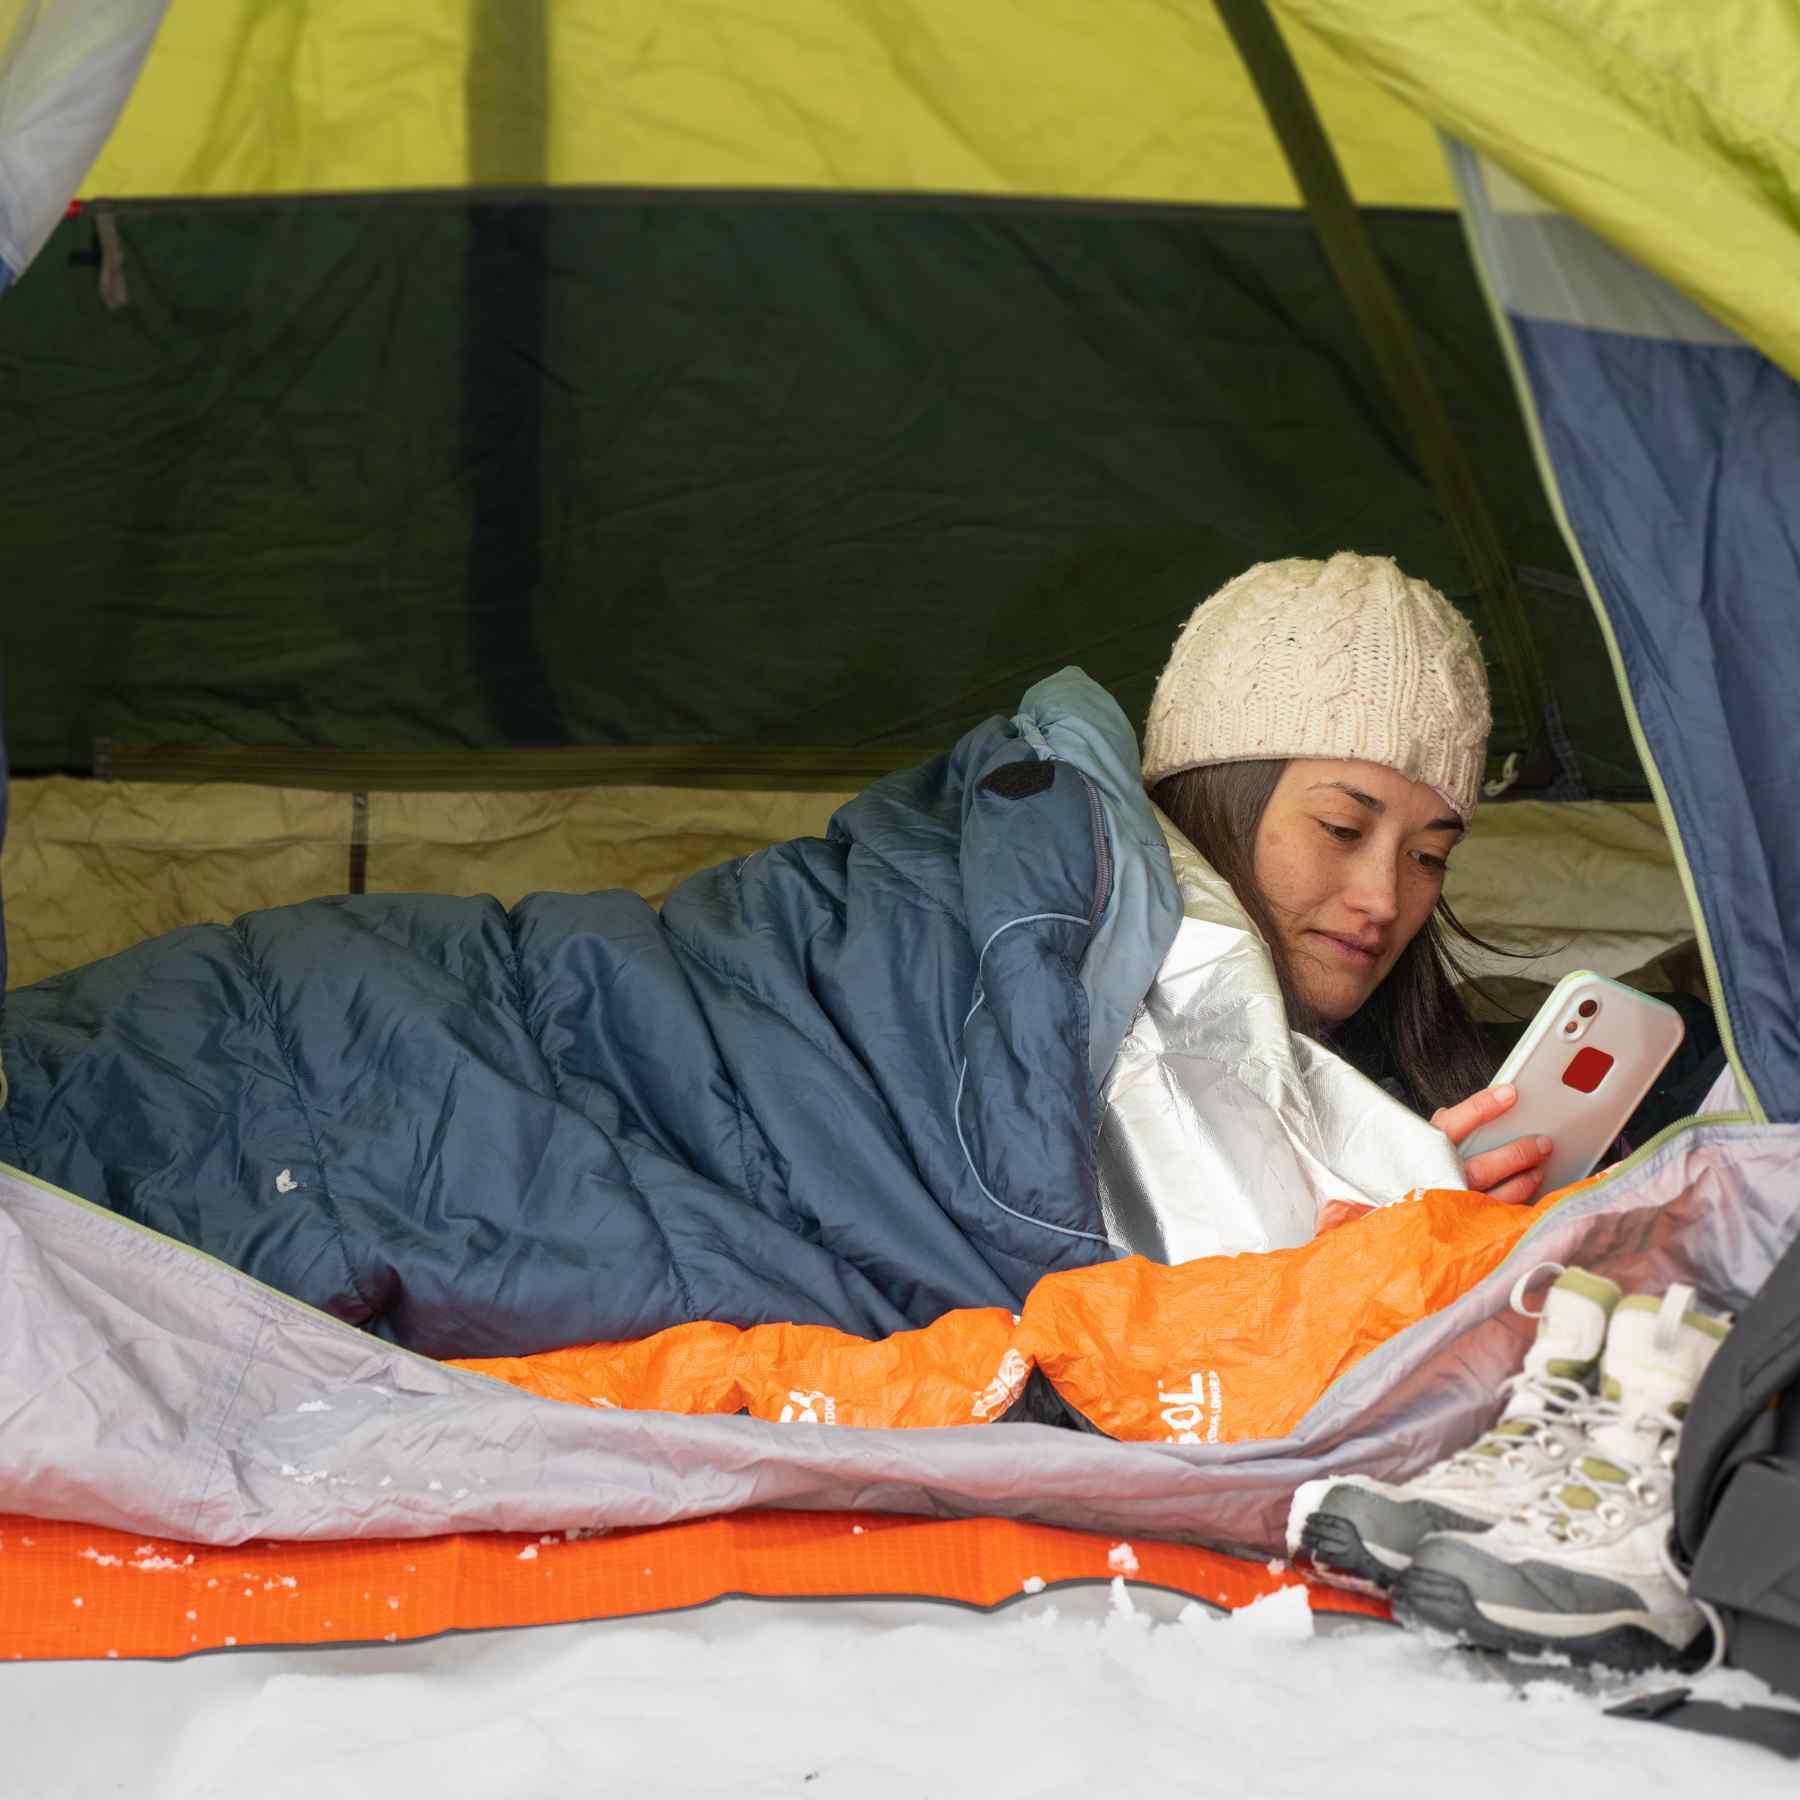 Thermal Bivvy with Rescue Whistle woman in tent with bivvy inside sleeping bag looking at phone in winter